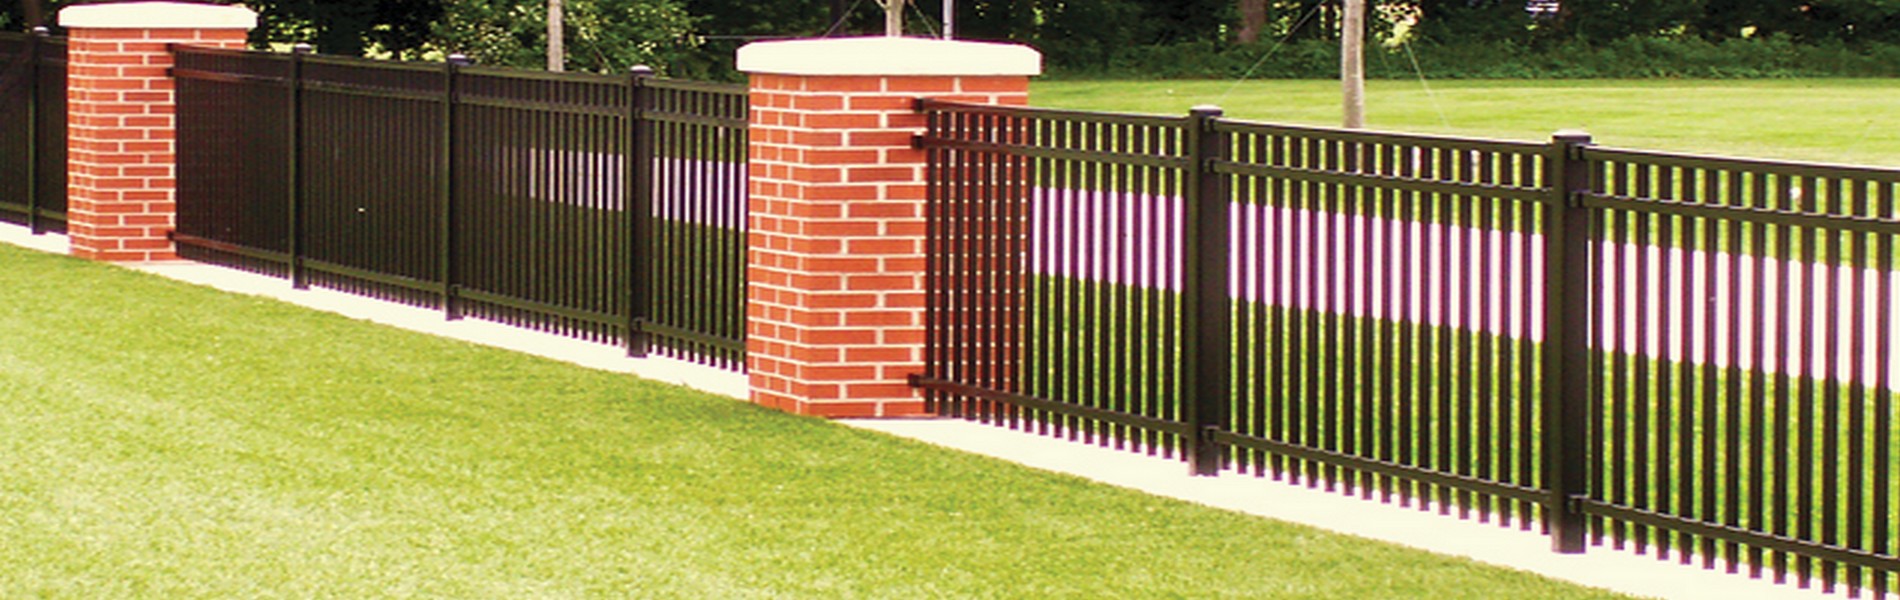 Get your grand rapids fence from Cedar Springs Fence